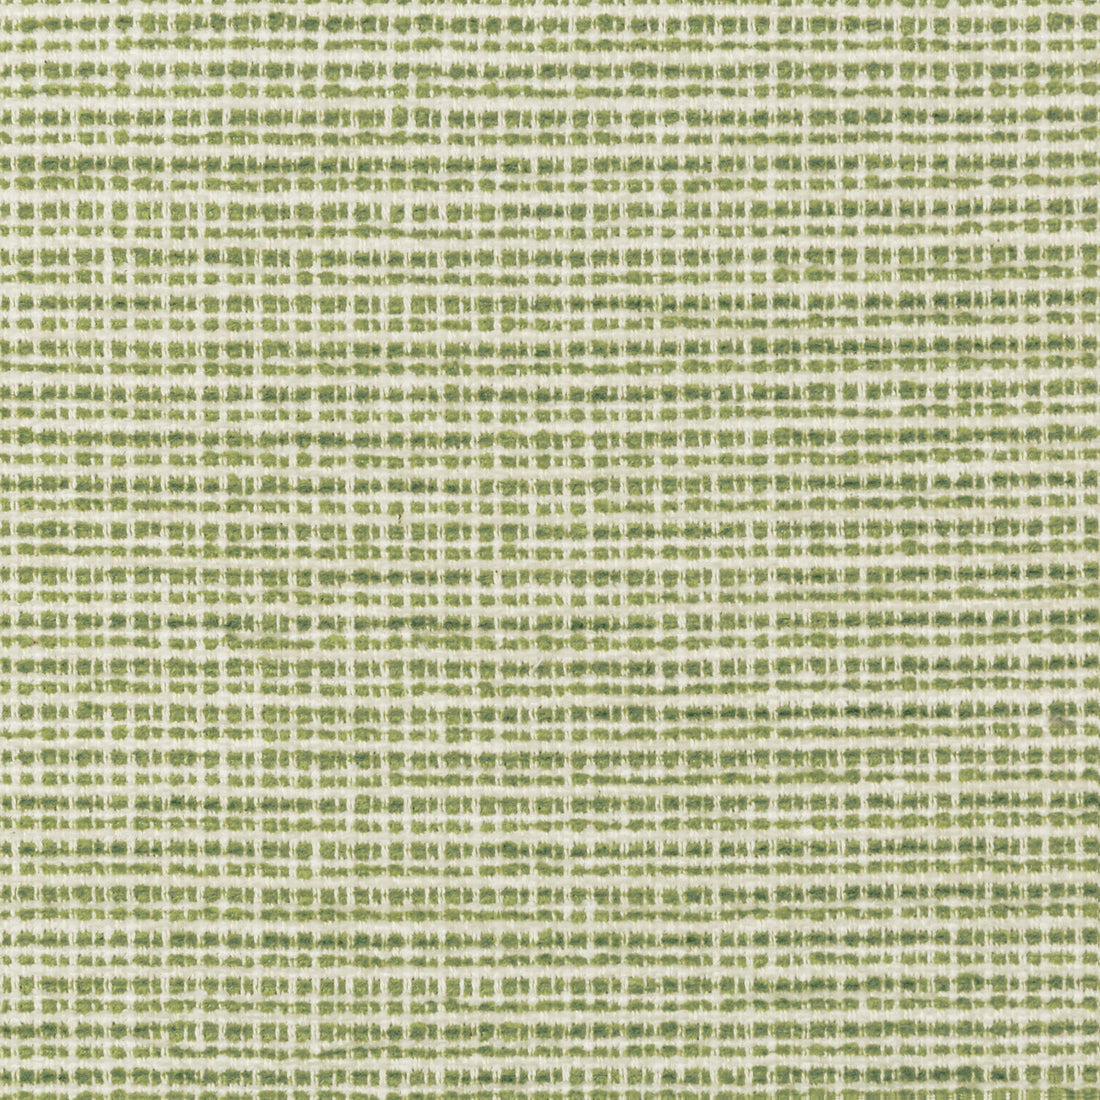 Freney Texture fabric in green color - pattern 8019149.3.0 - by Brunschwig &amp; Fils in the Chambery Textures II collection